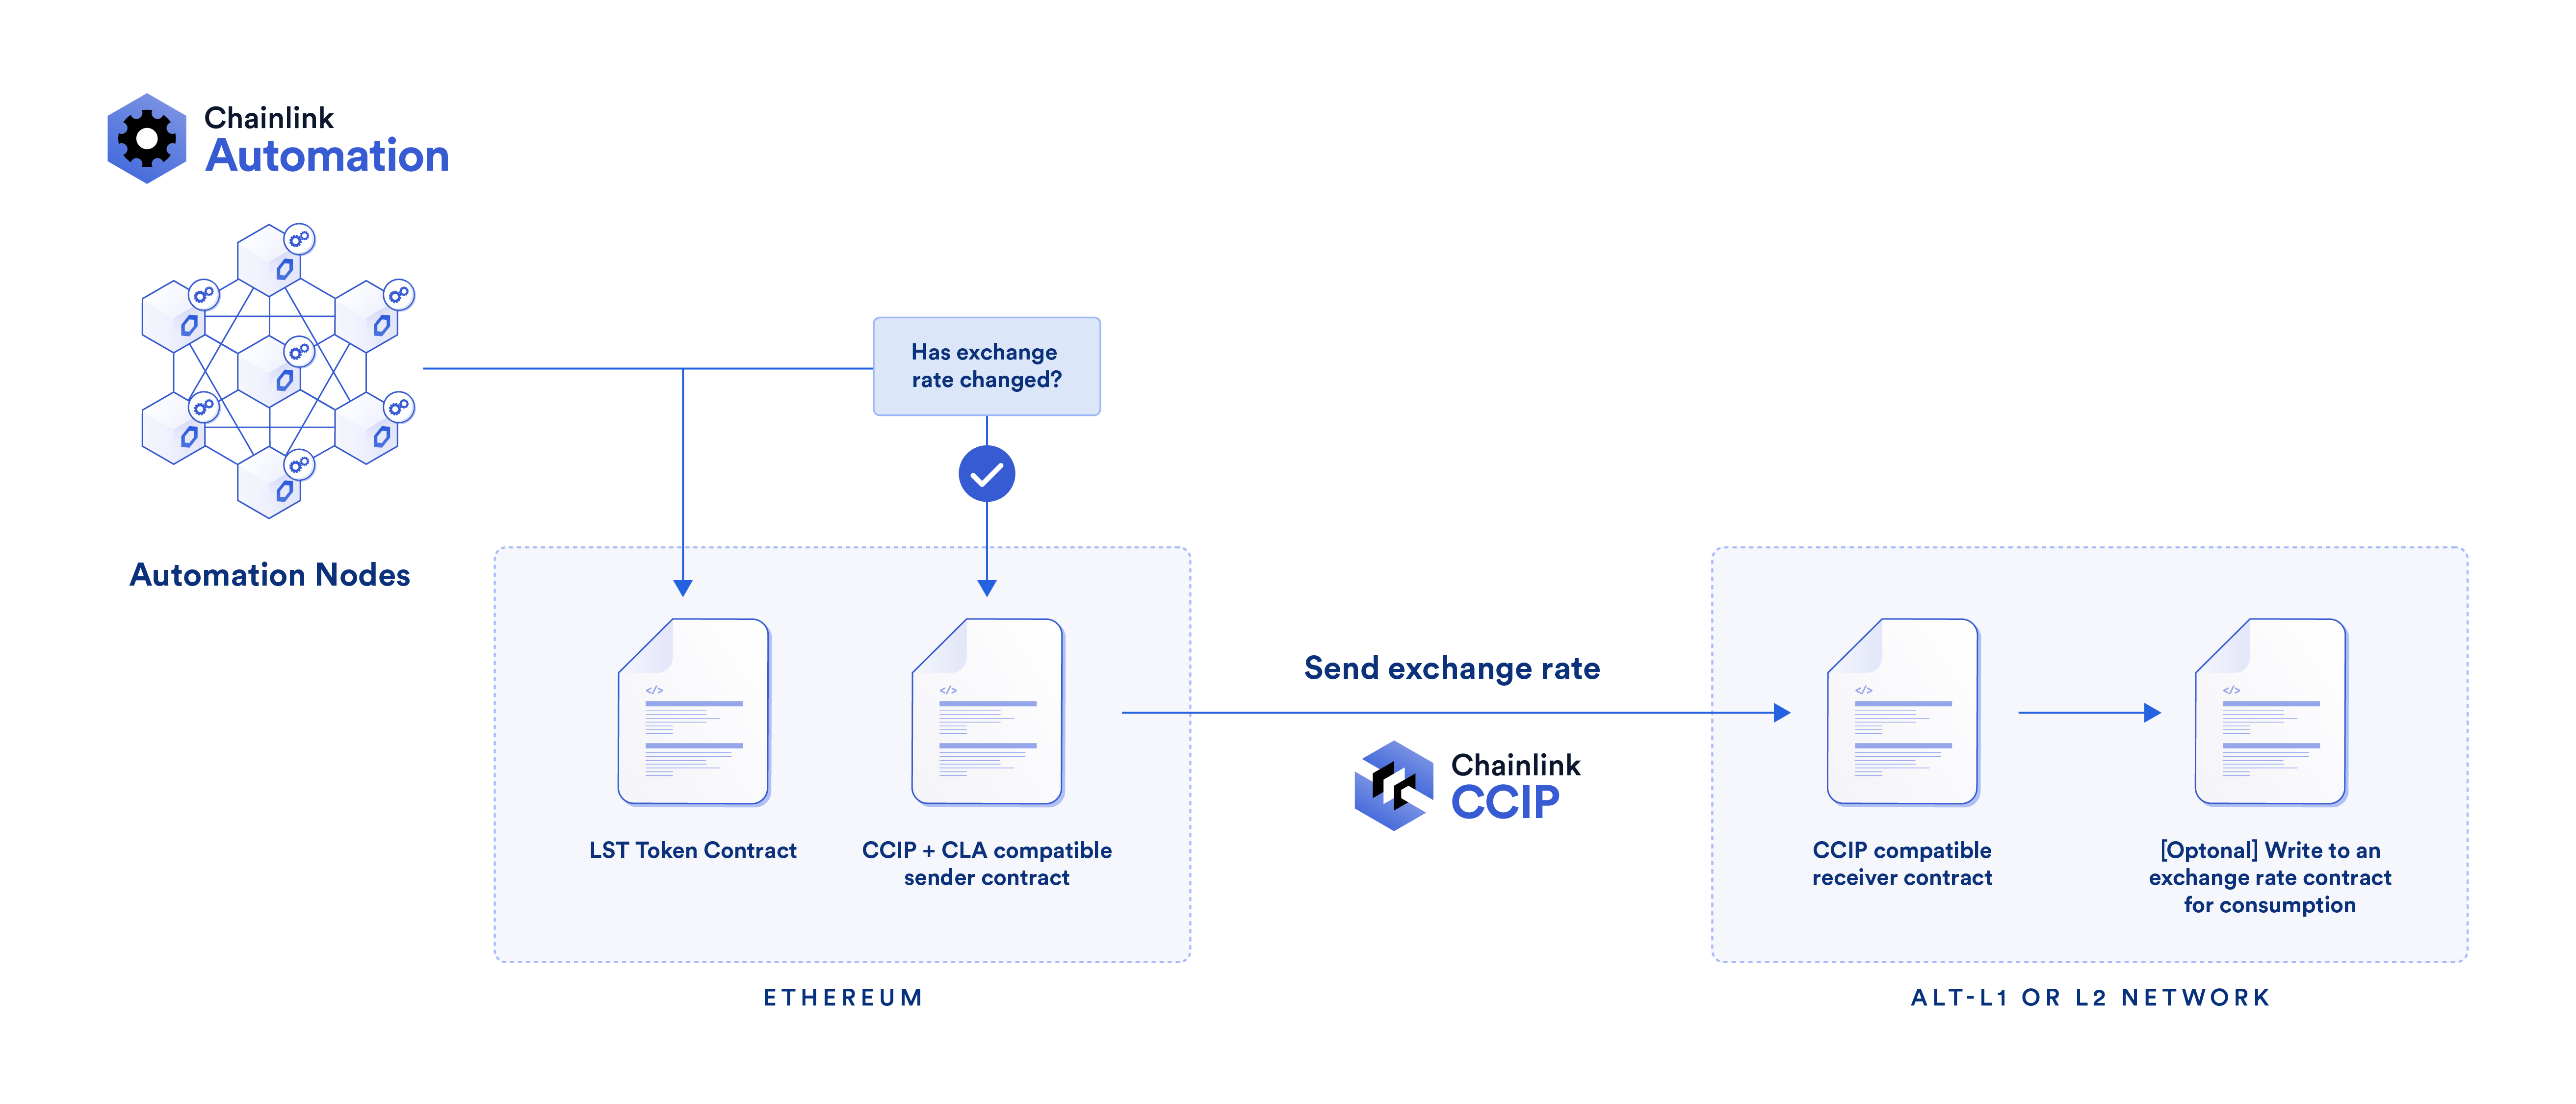 Chainlink Automation + CCIP unlock cross-chain liquid staking functionality. 